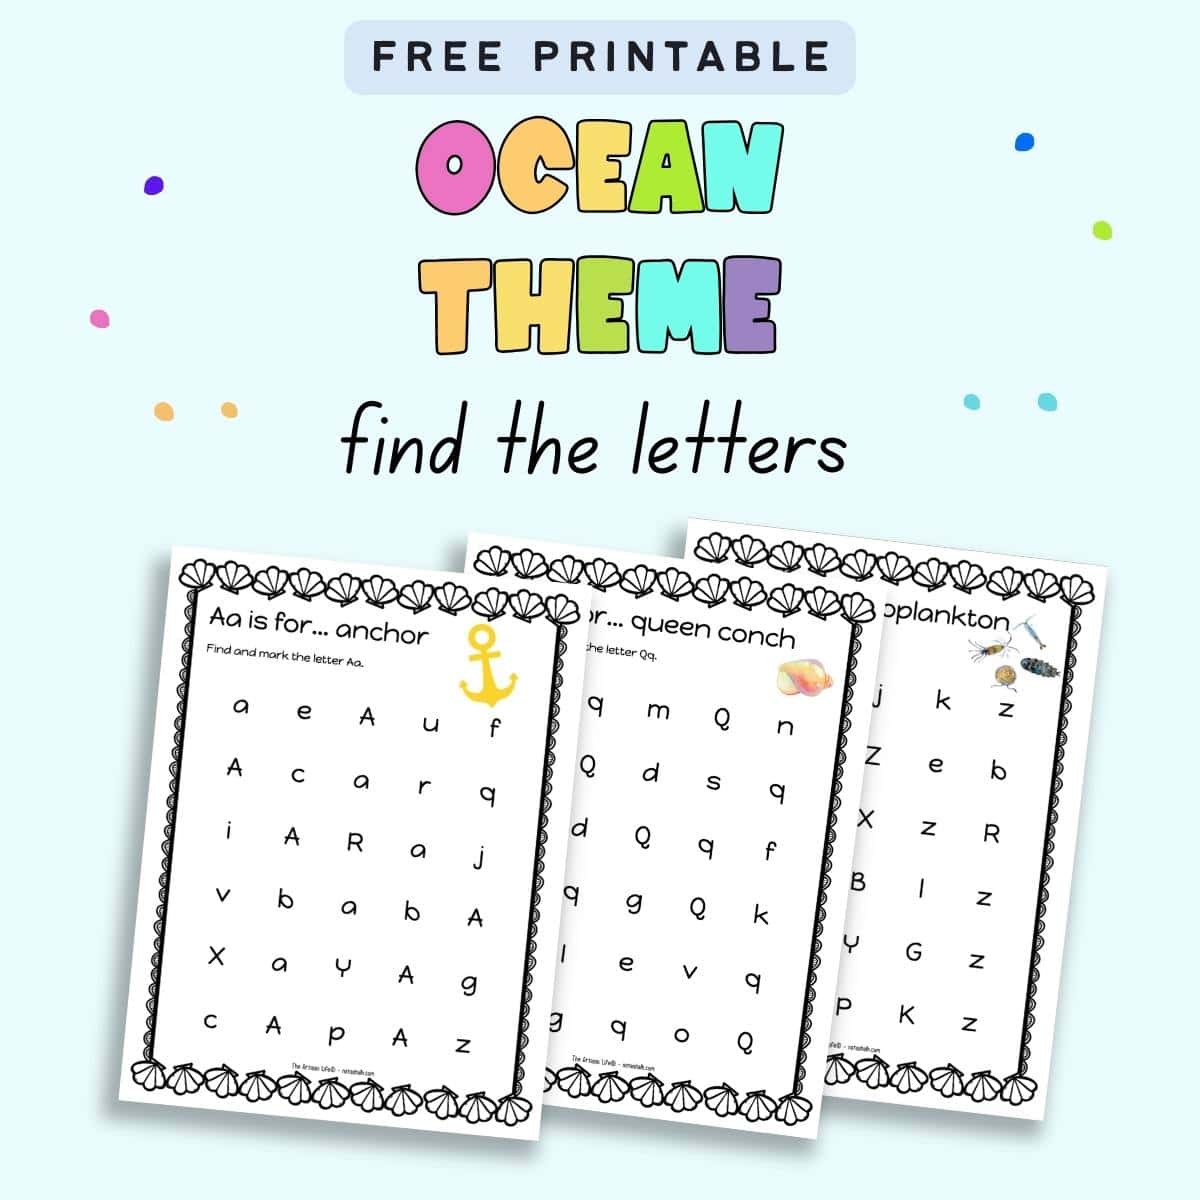 Text "free printable ocean theme find the letters" with a preview of three sheets for letters a, q, and z